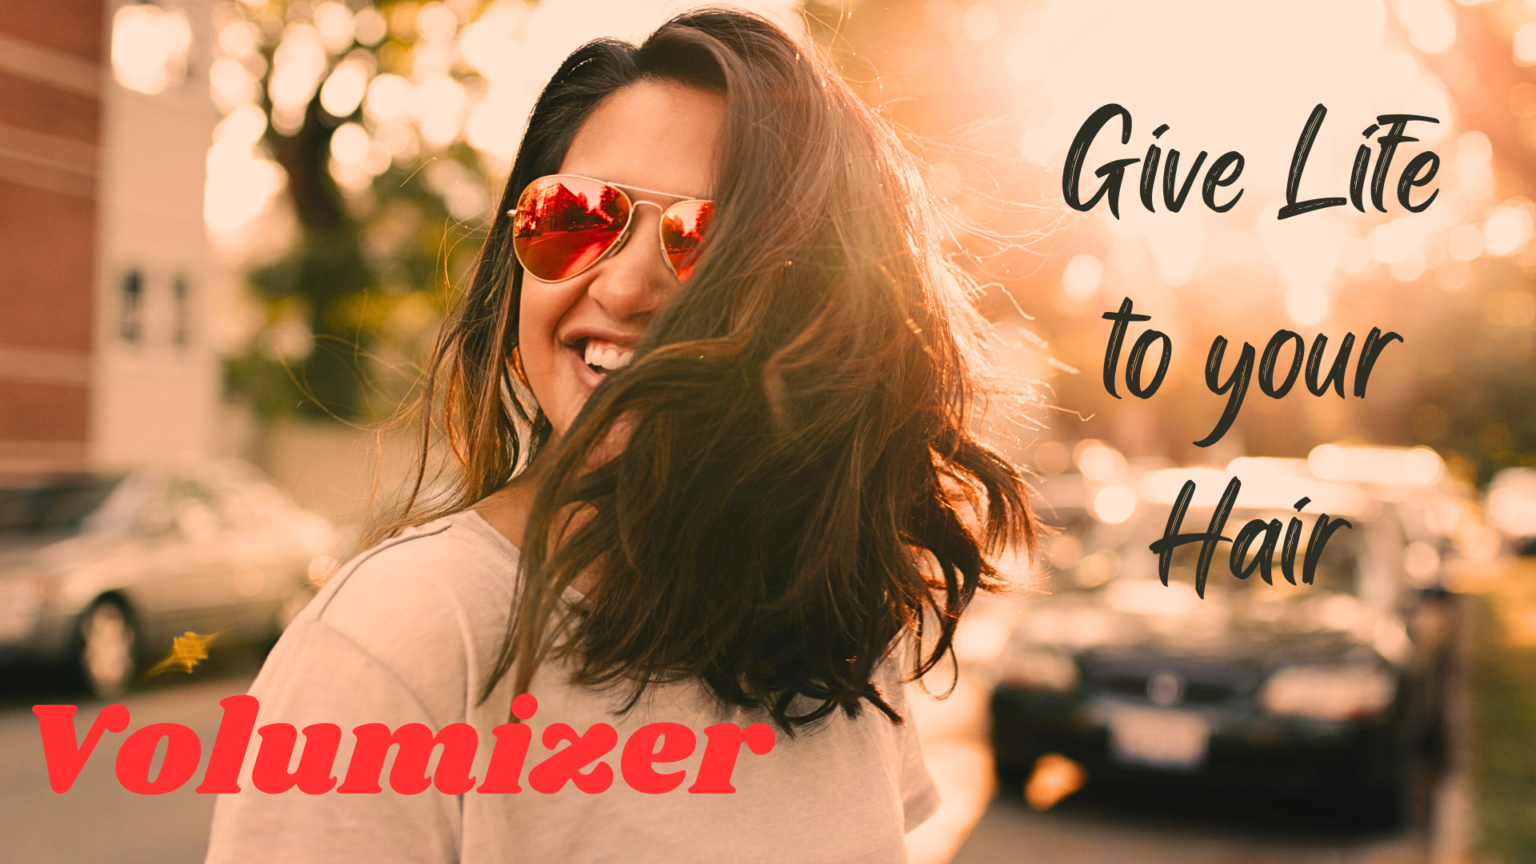 Give Life to your Hair with our Volumizer